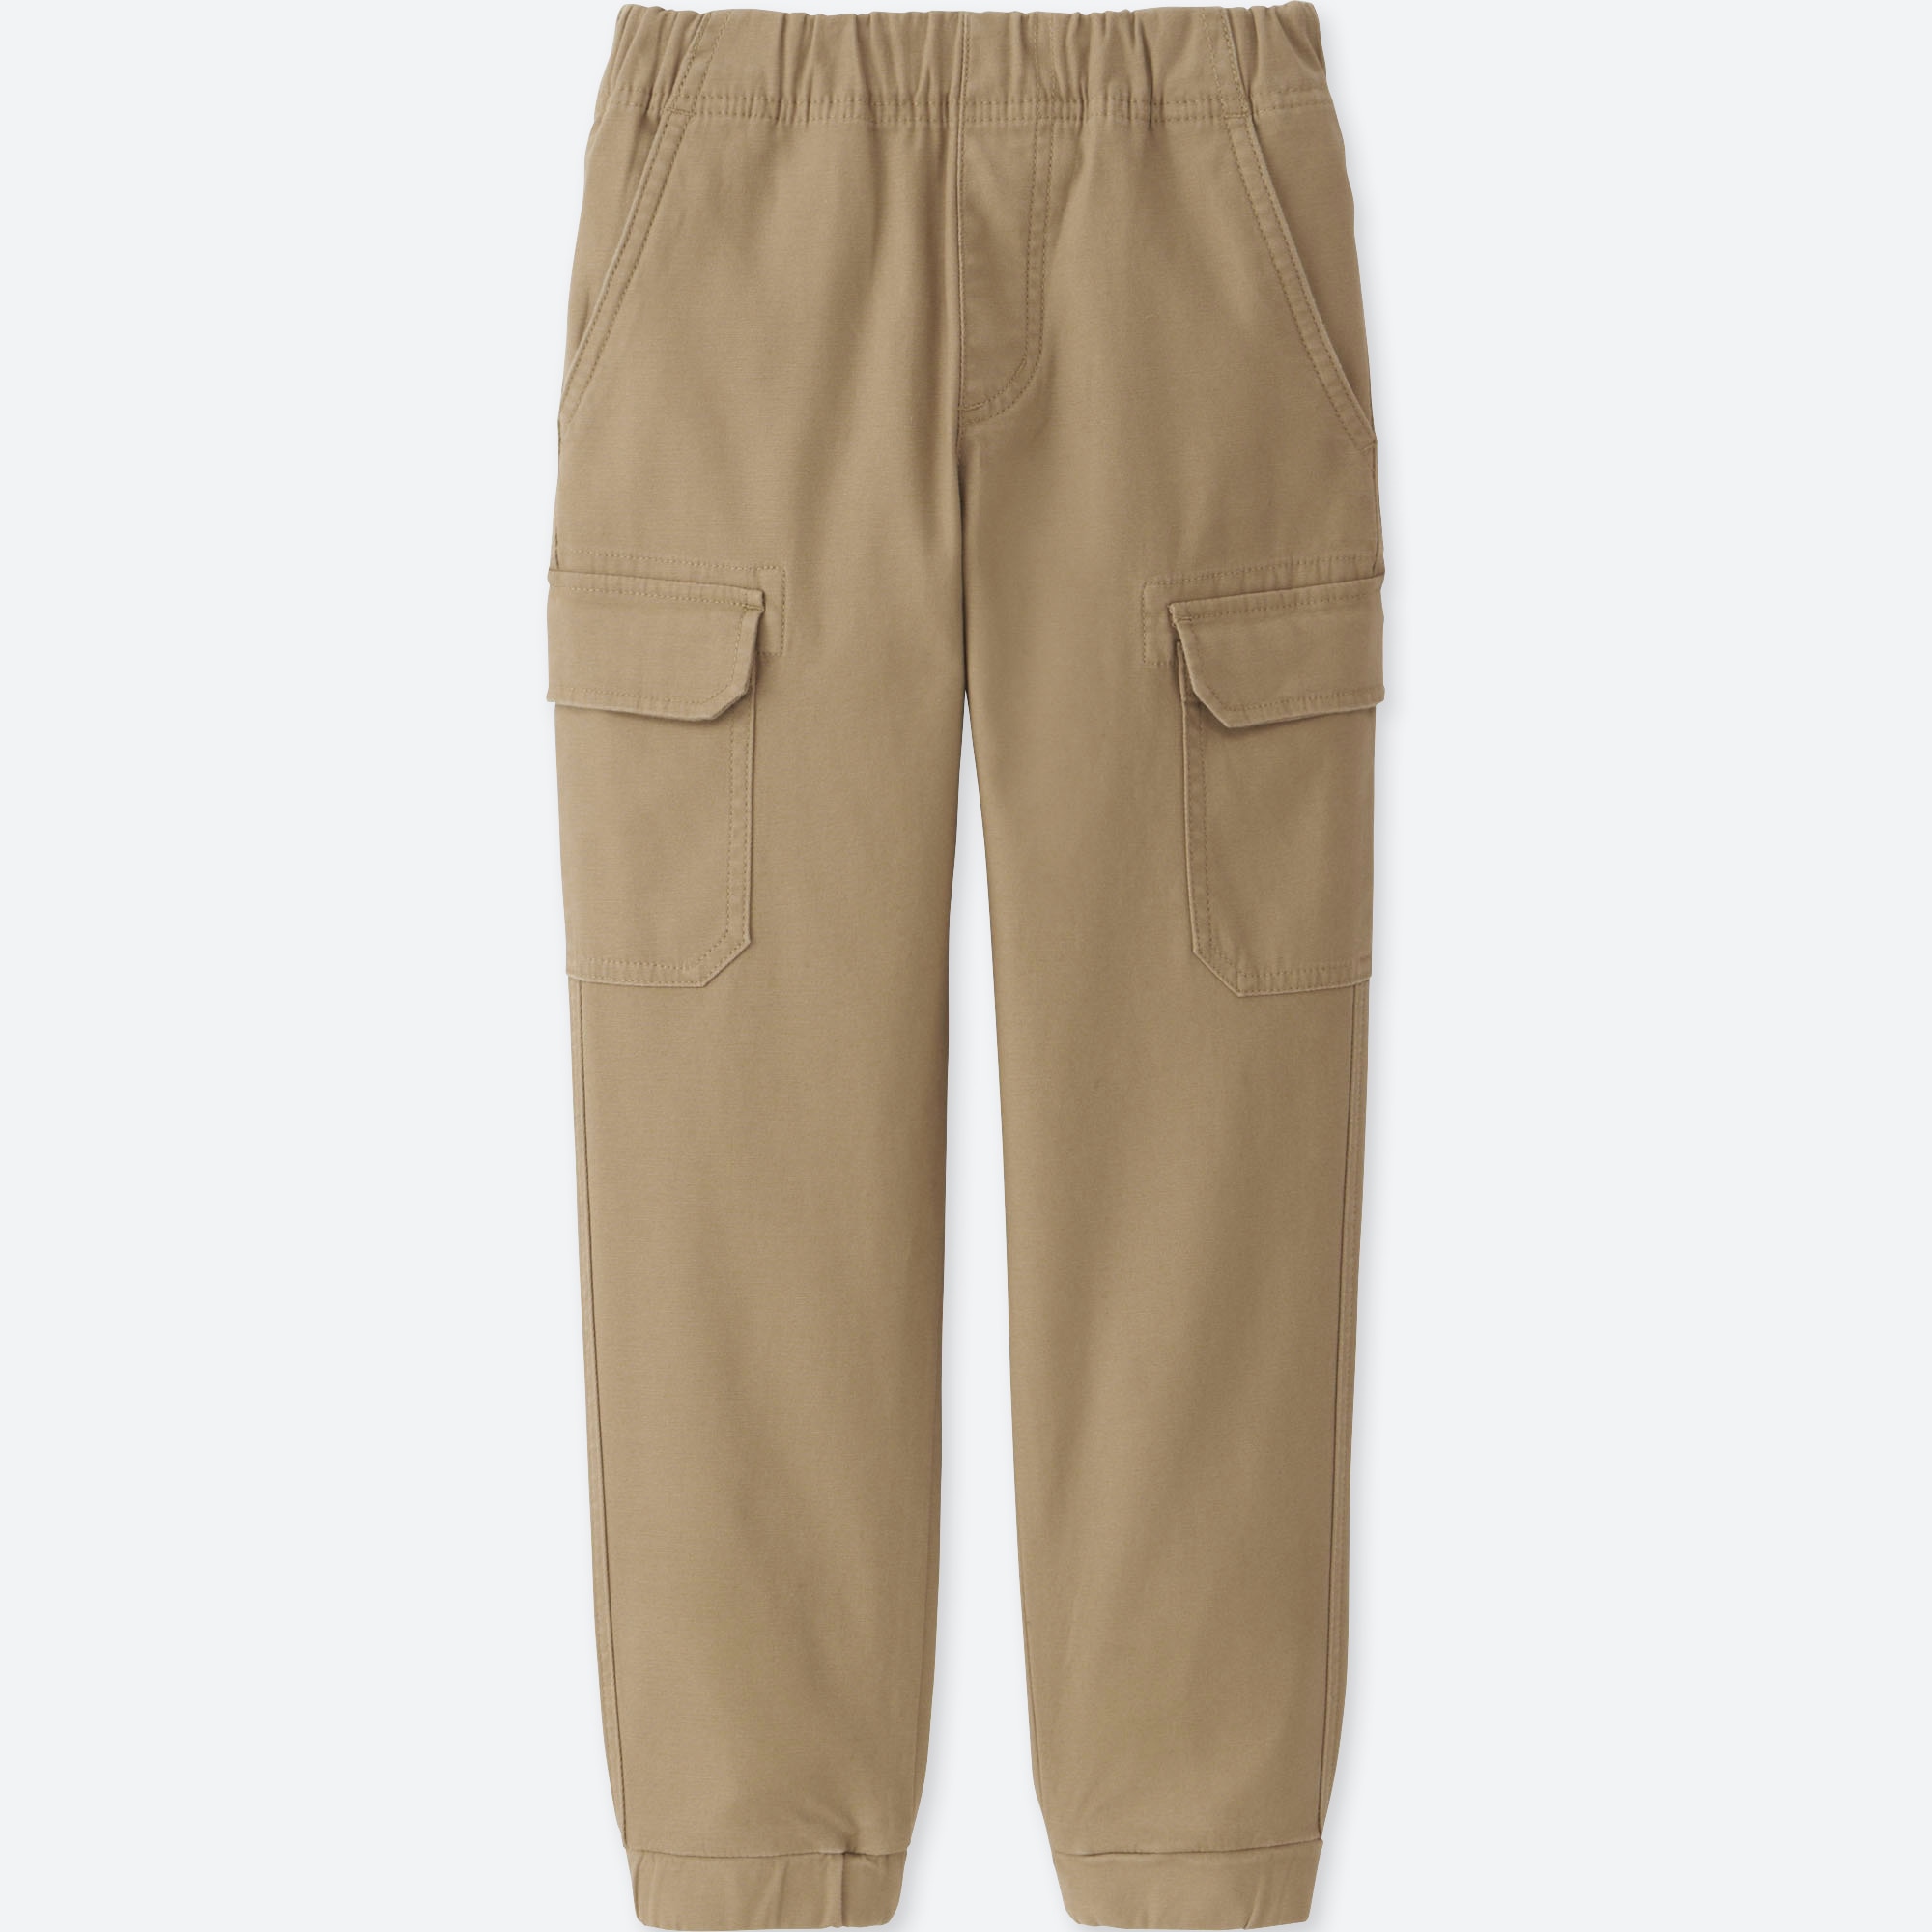 ankle pant for boys